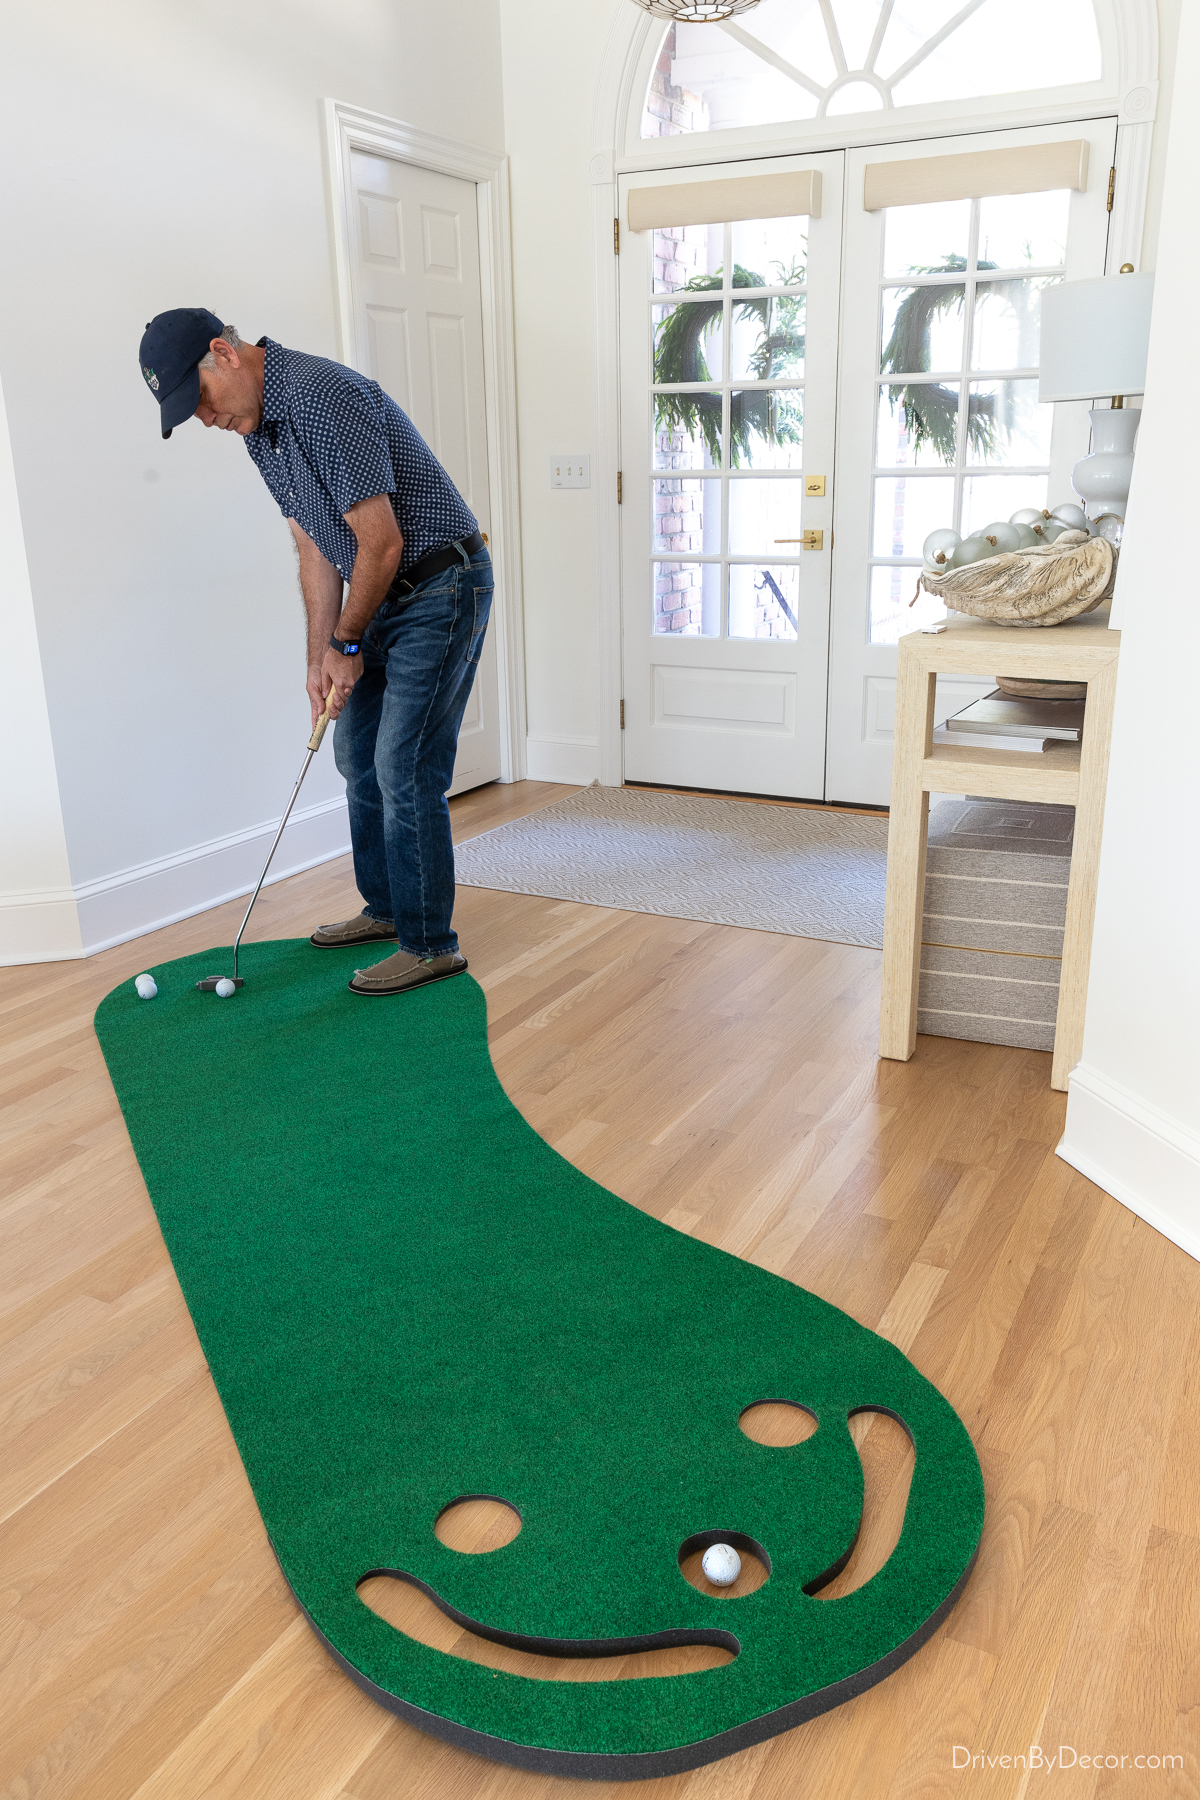 Roll up putting green for indoor practice as a great gift for a golfer